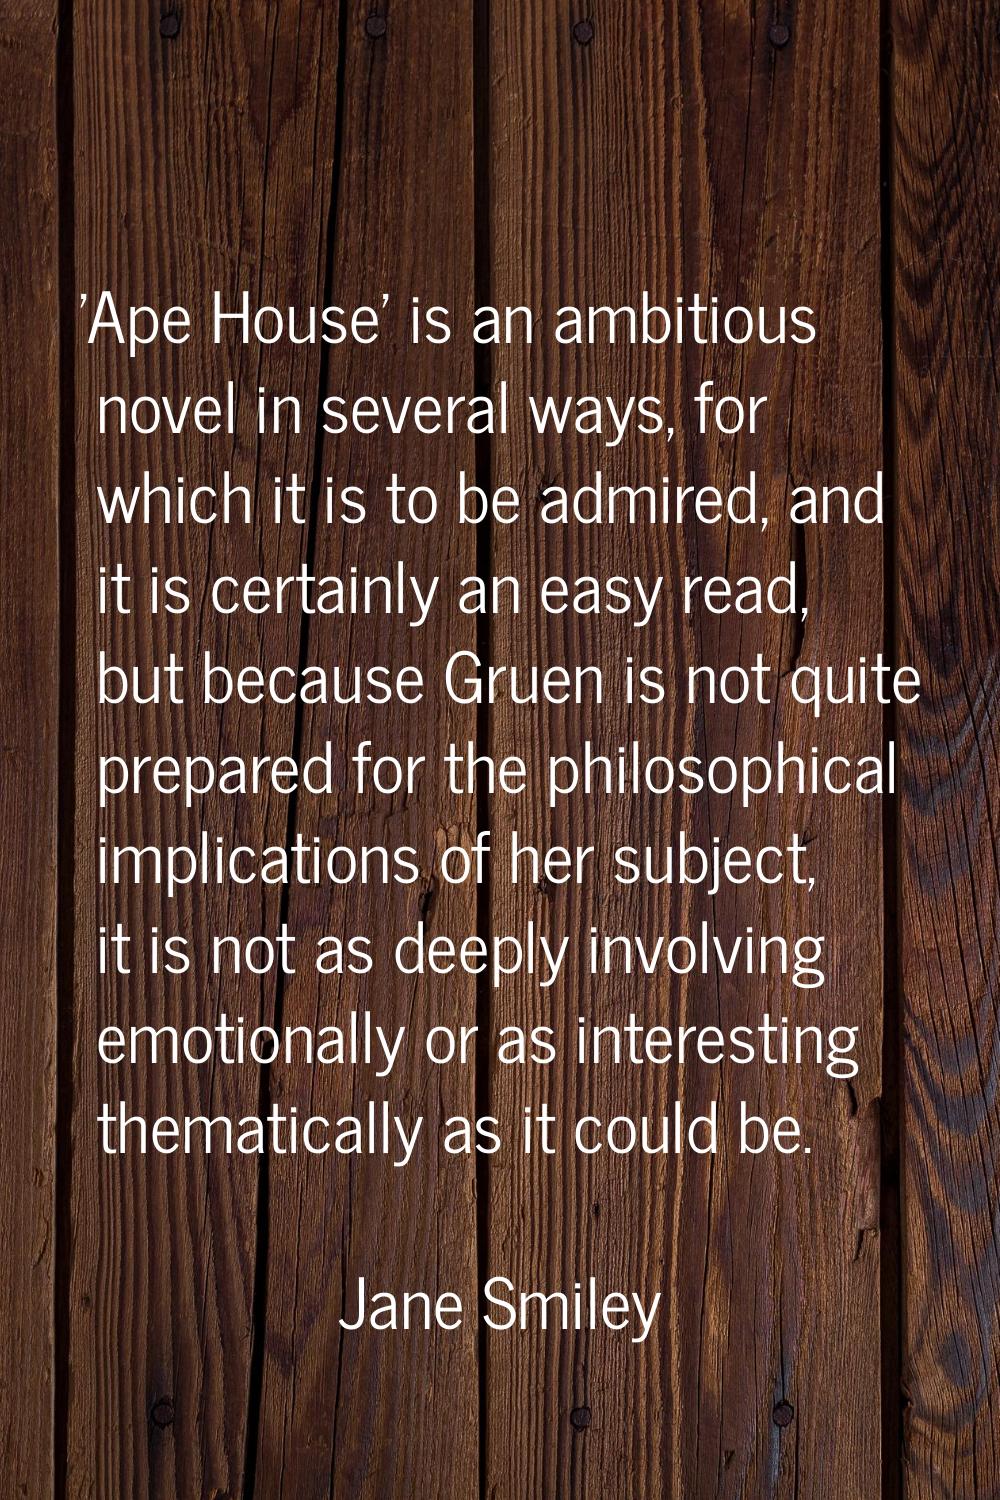 'Ape House' is an ambitious novel in several ways, for which it is to be admired, and it is certain